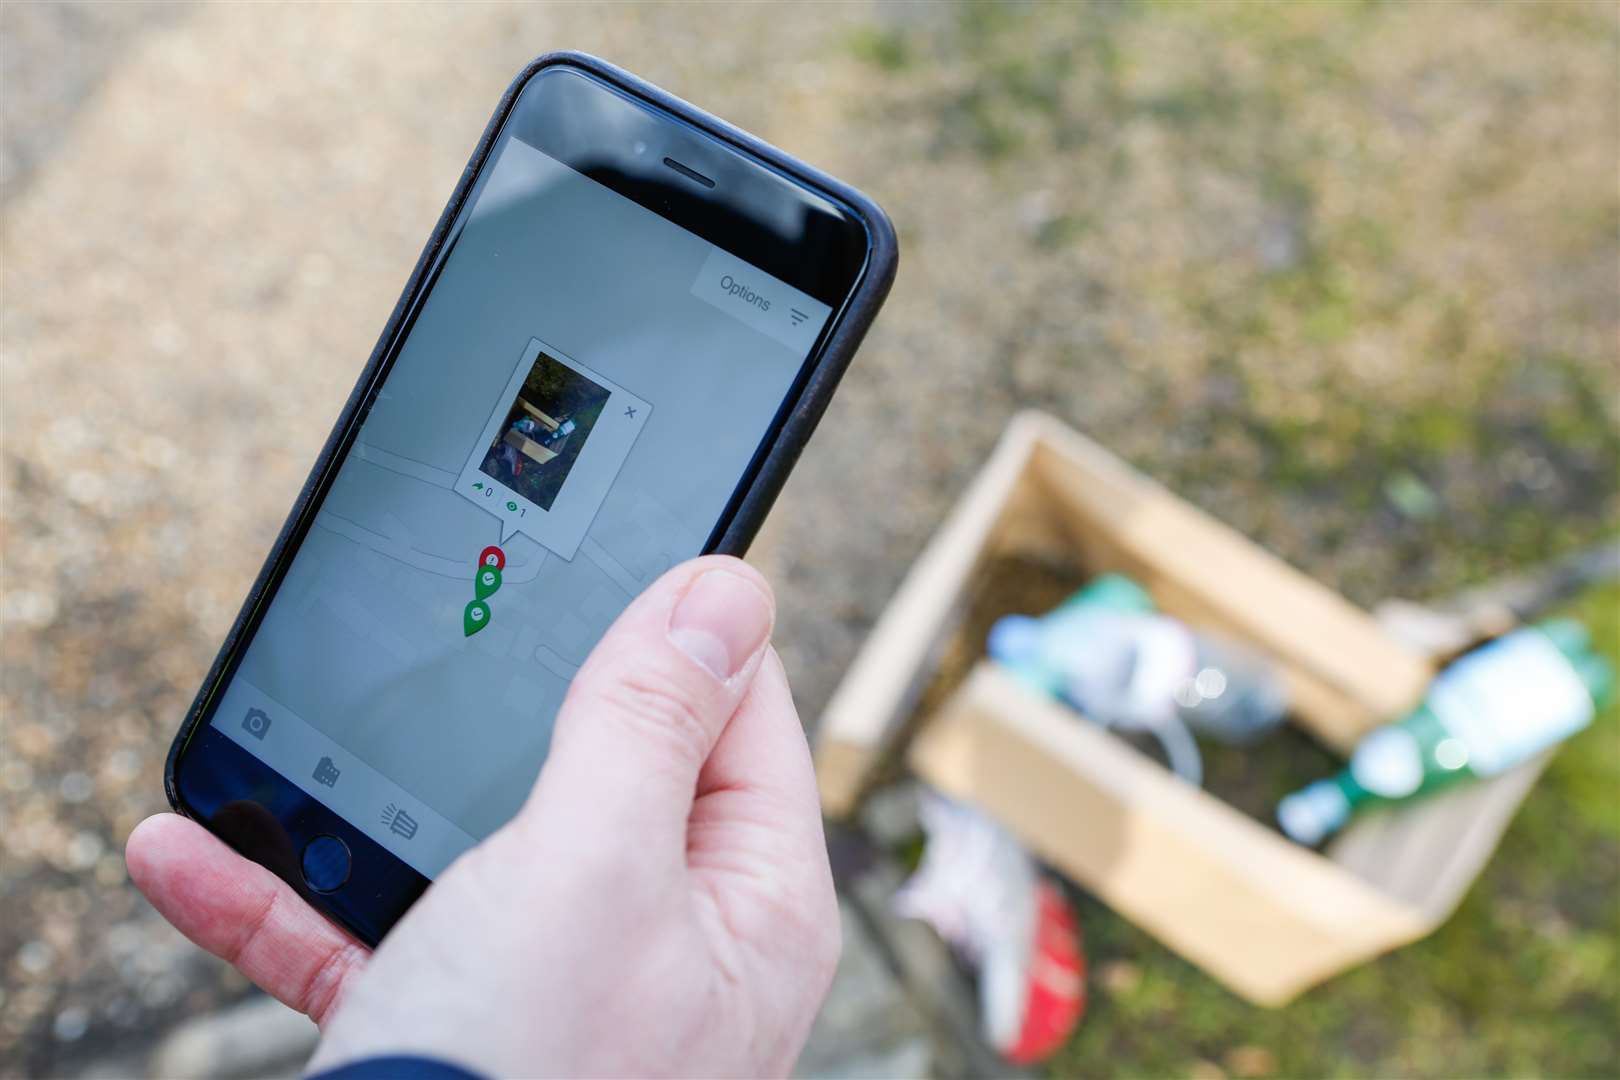 LitterGram partnered up with Tonbridge and Malling Borough Council to combat litter